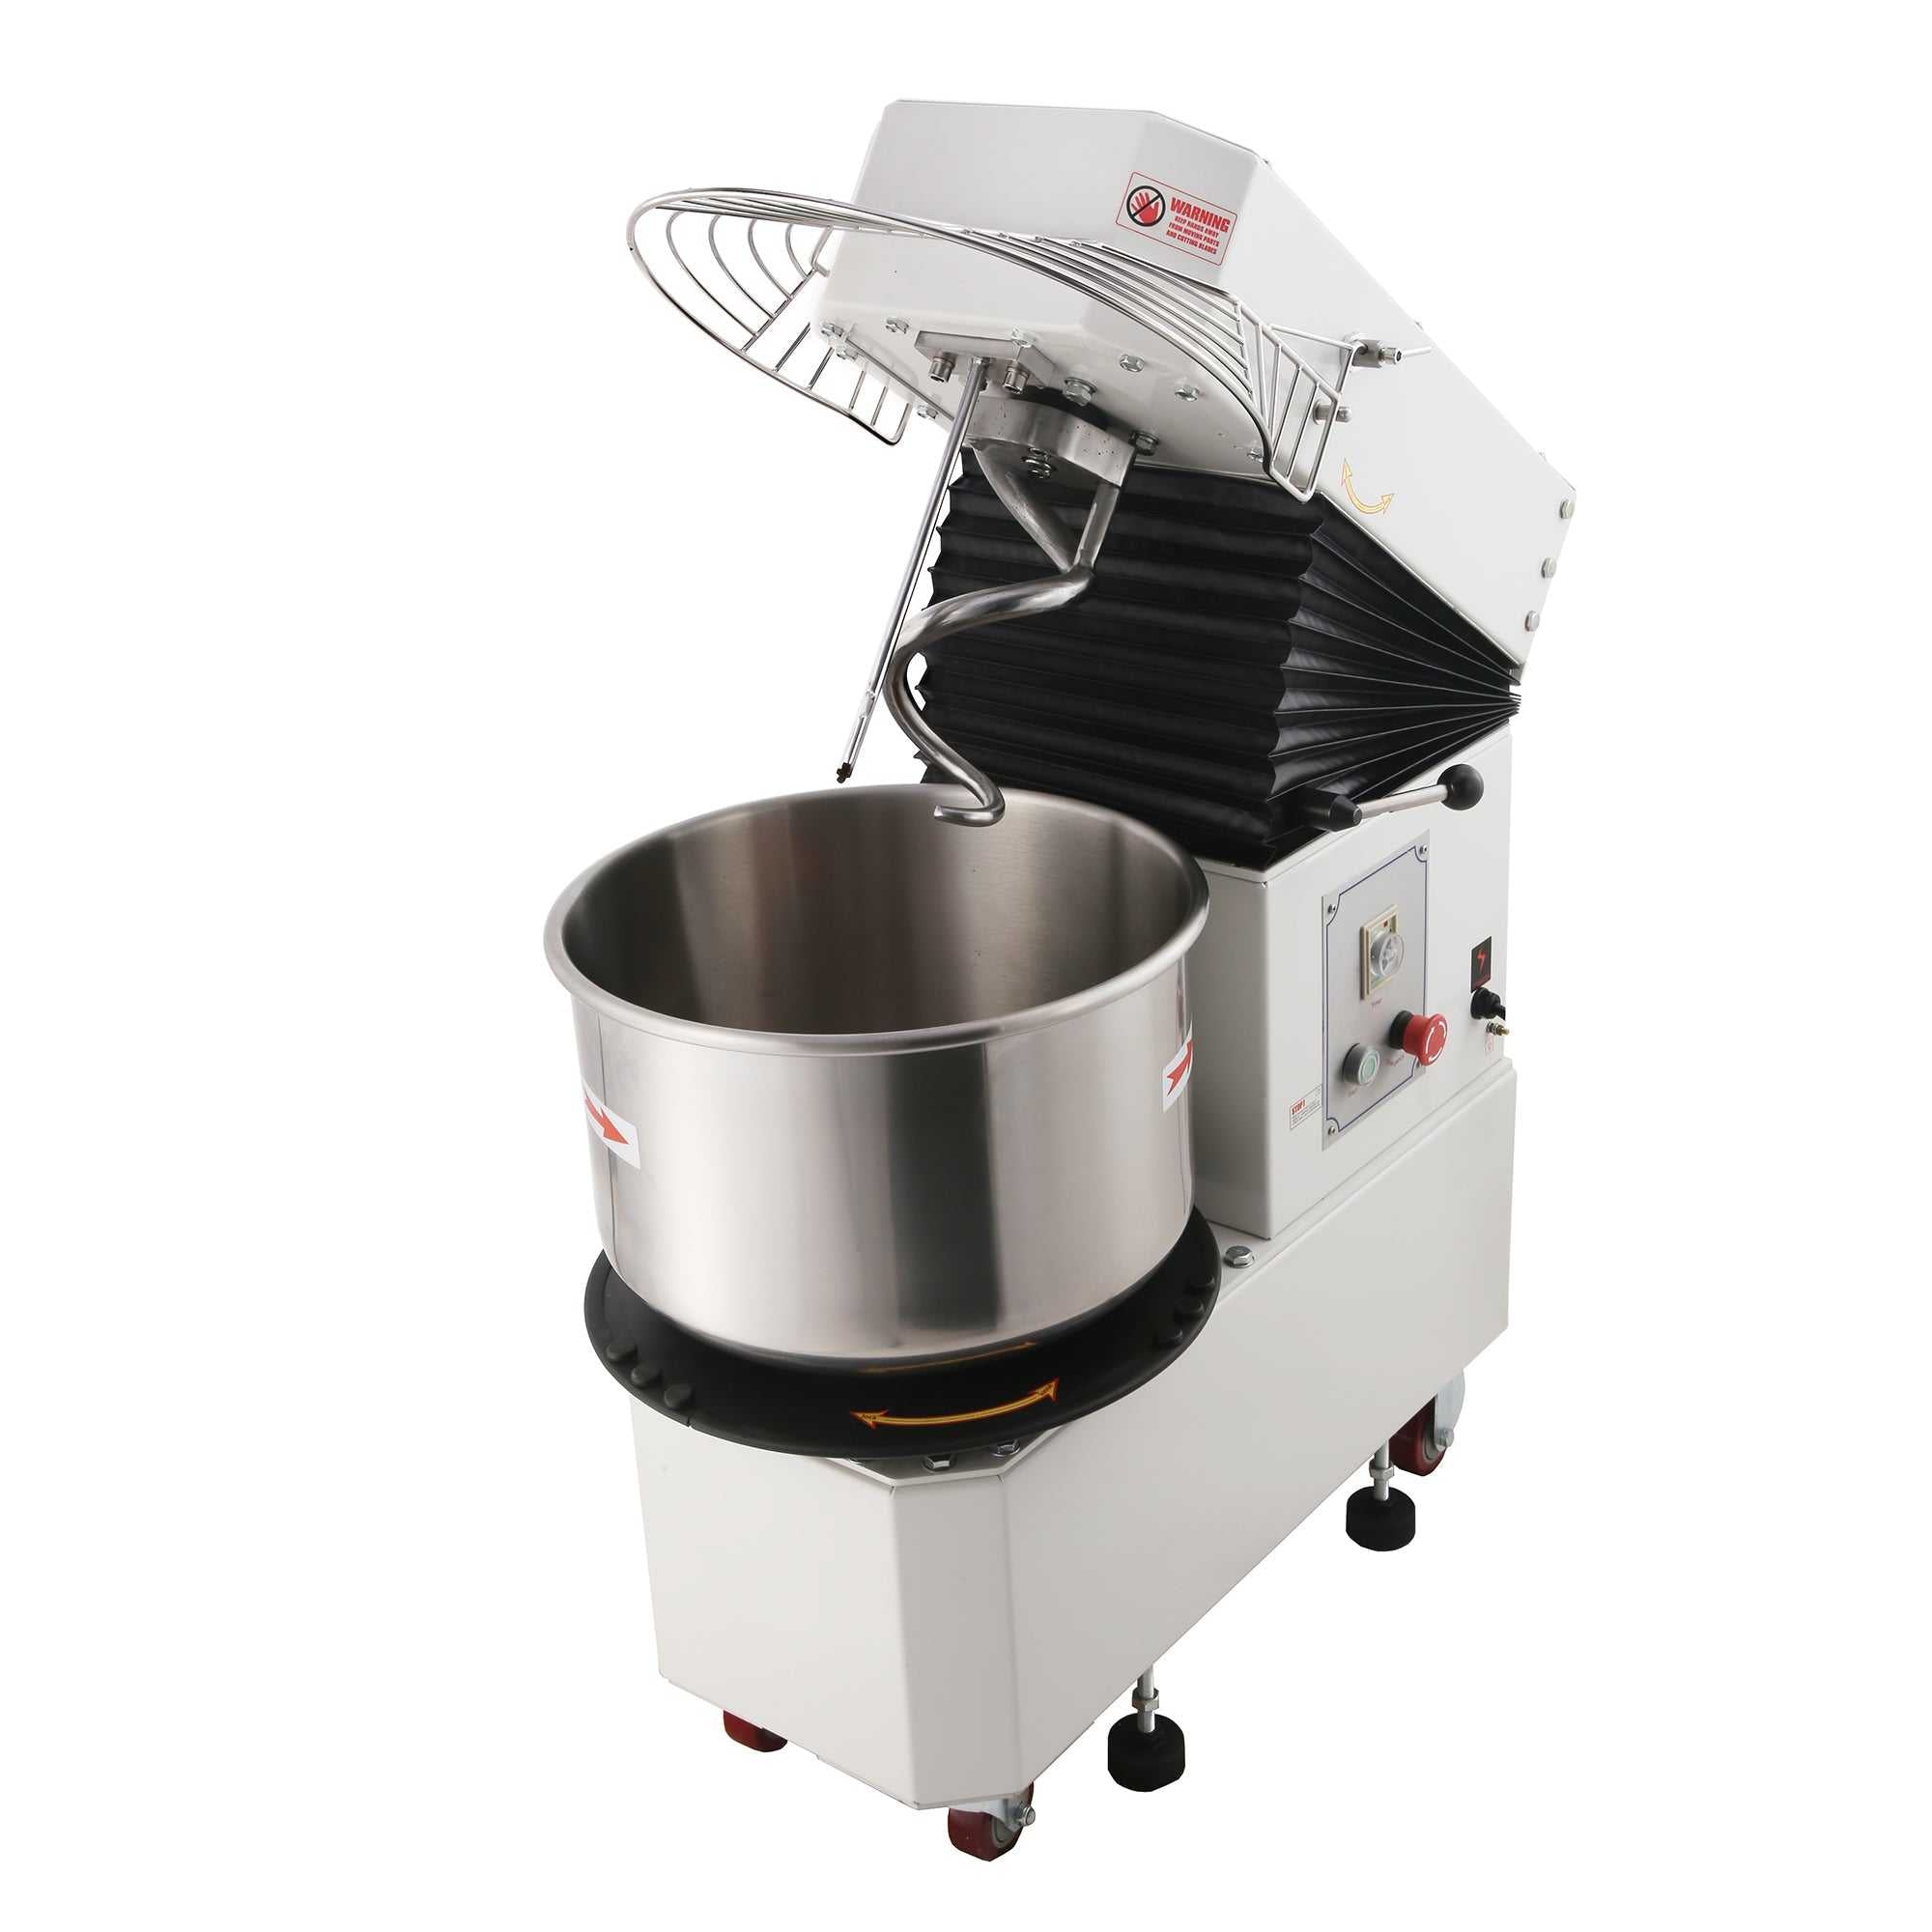 Hakka Commercial Dough Mixers 20 Quart Stainless Steel 2 Speed Rising Spiral Mixers-HTD20 (240V/50Hz,1 Phase)